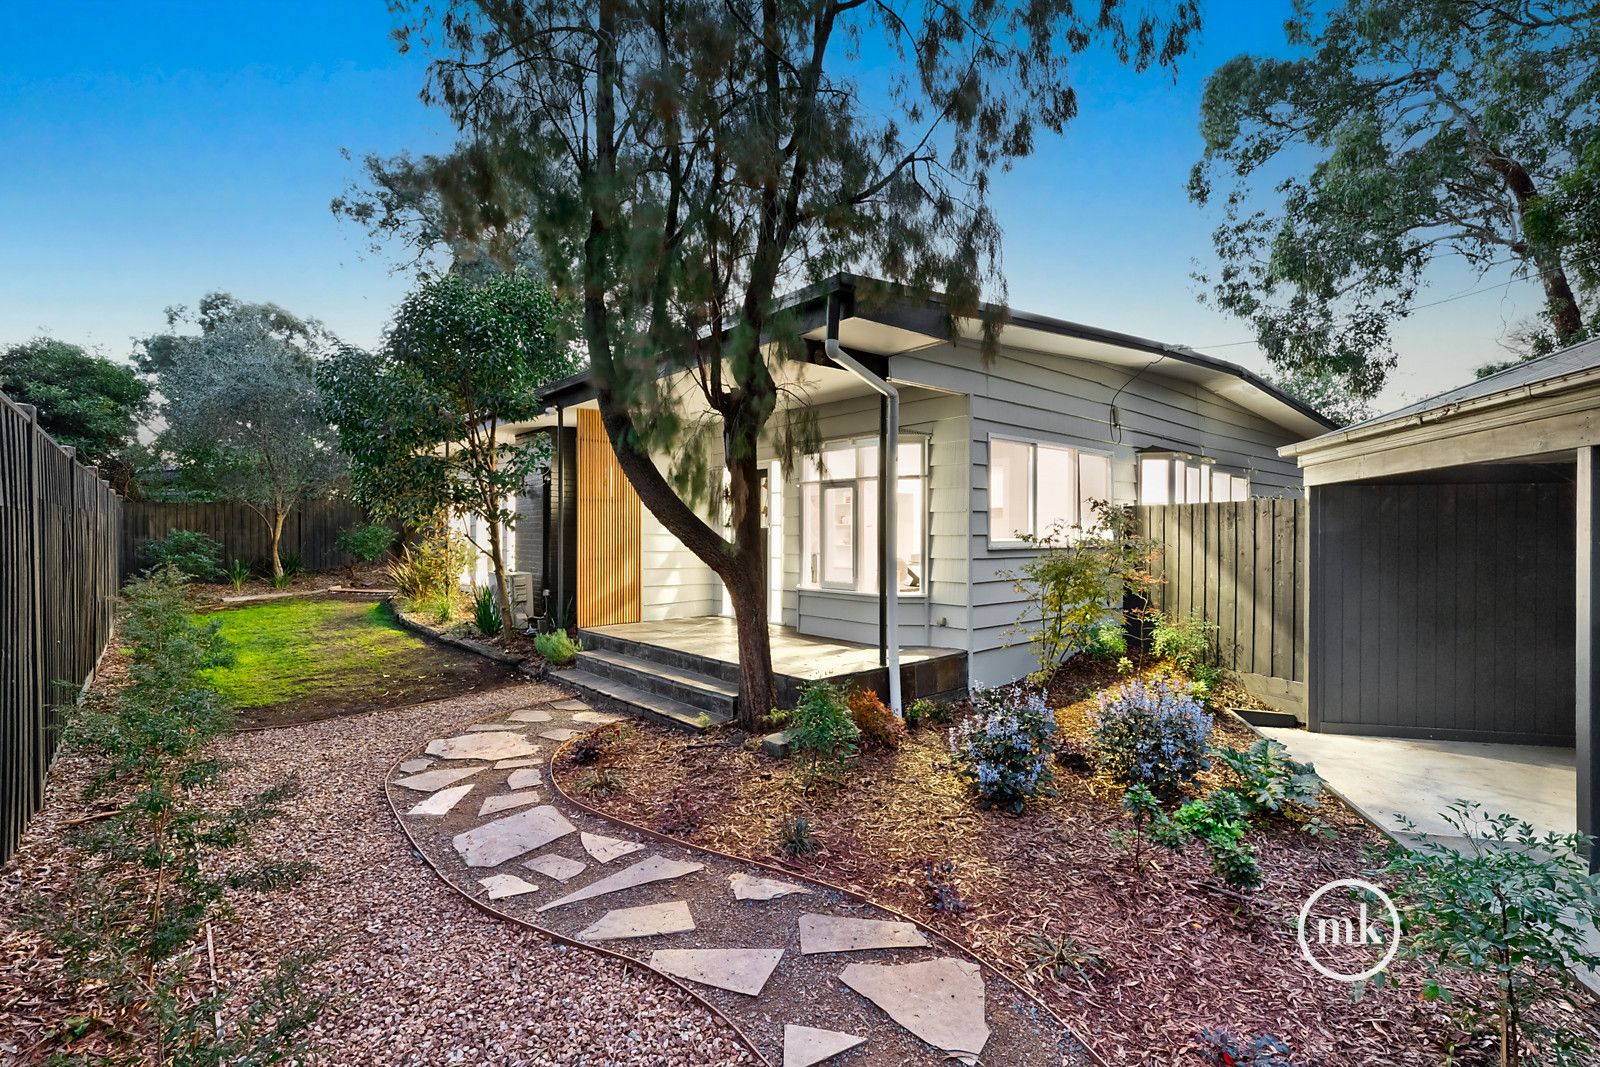 61A Greenhill Road, Greensborough | Property History & Address Research ...